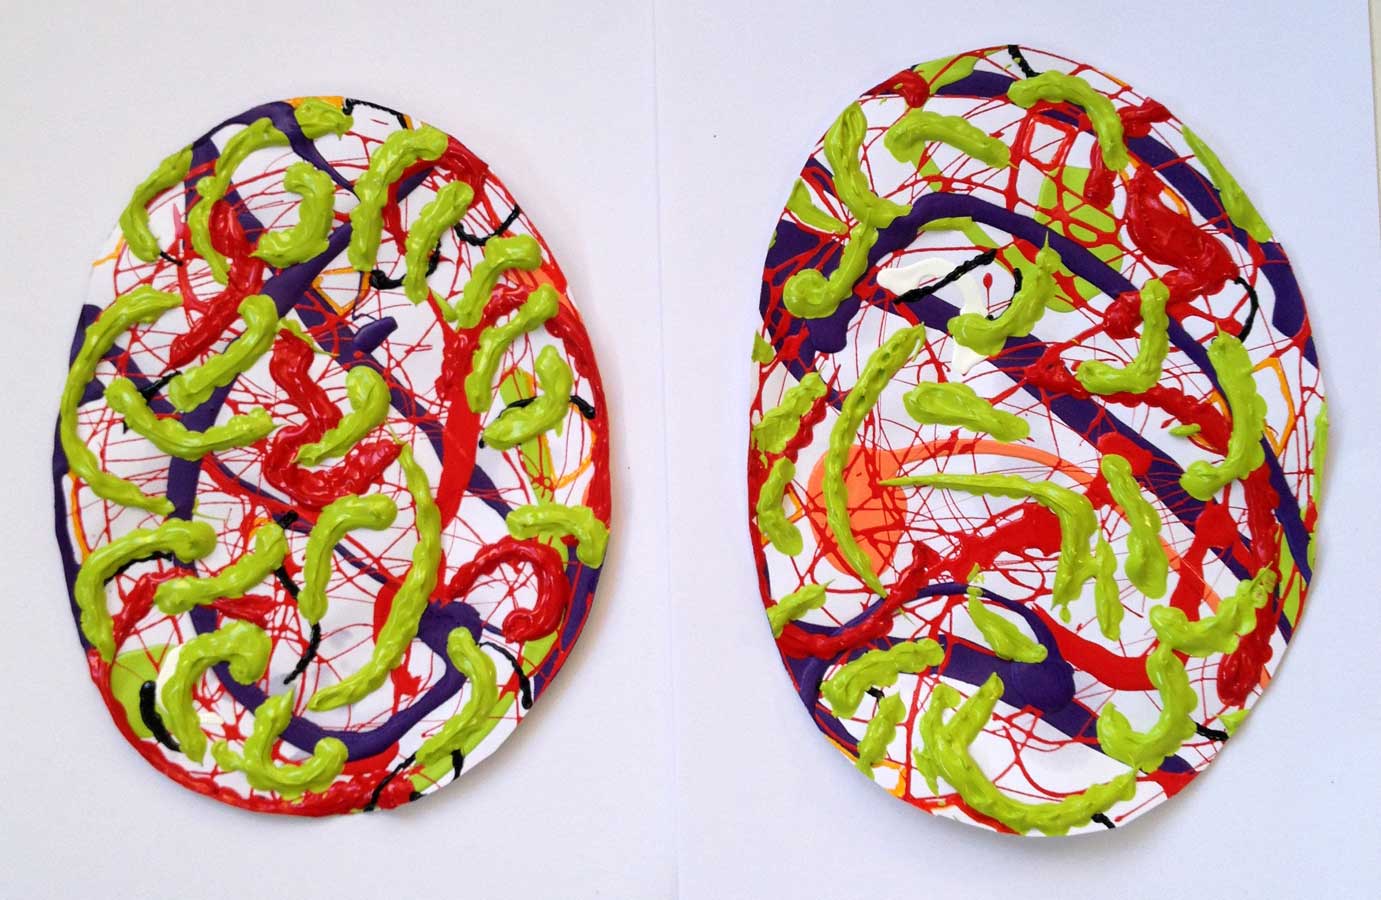 Eggs 22, diptych, painting by Nicola Guerraz, acrylic on paper, 21 x 30 cm each, 2014